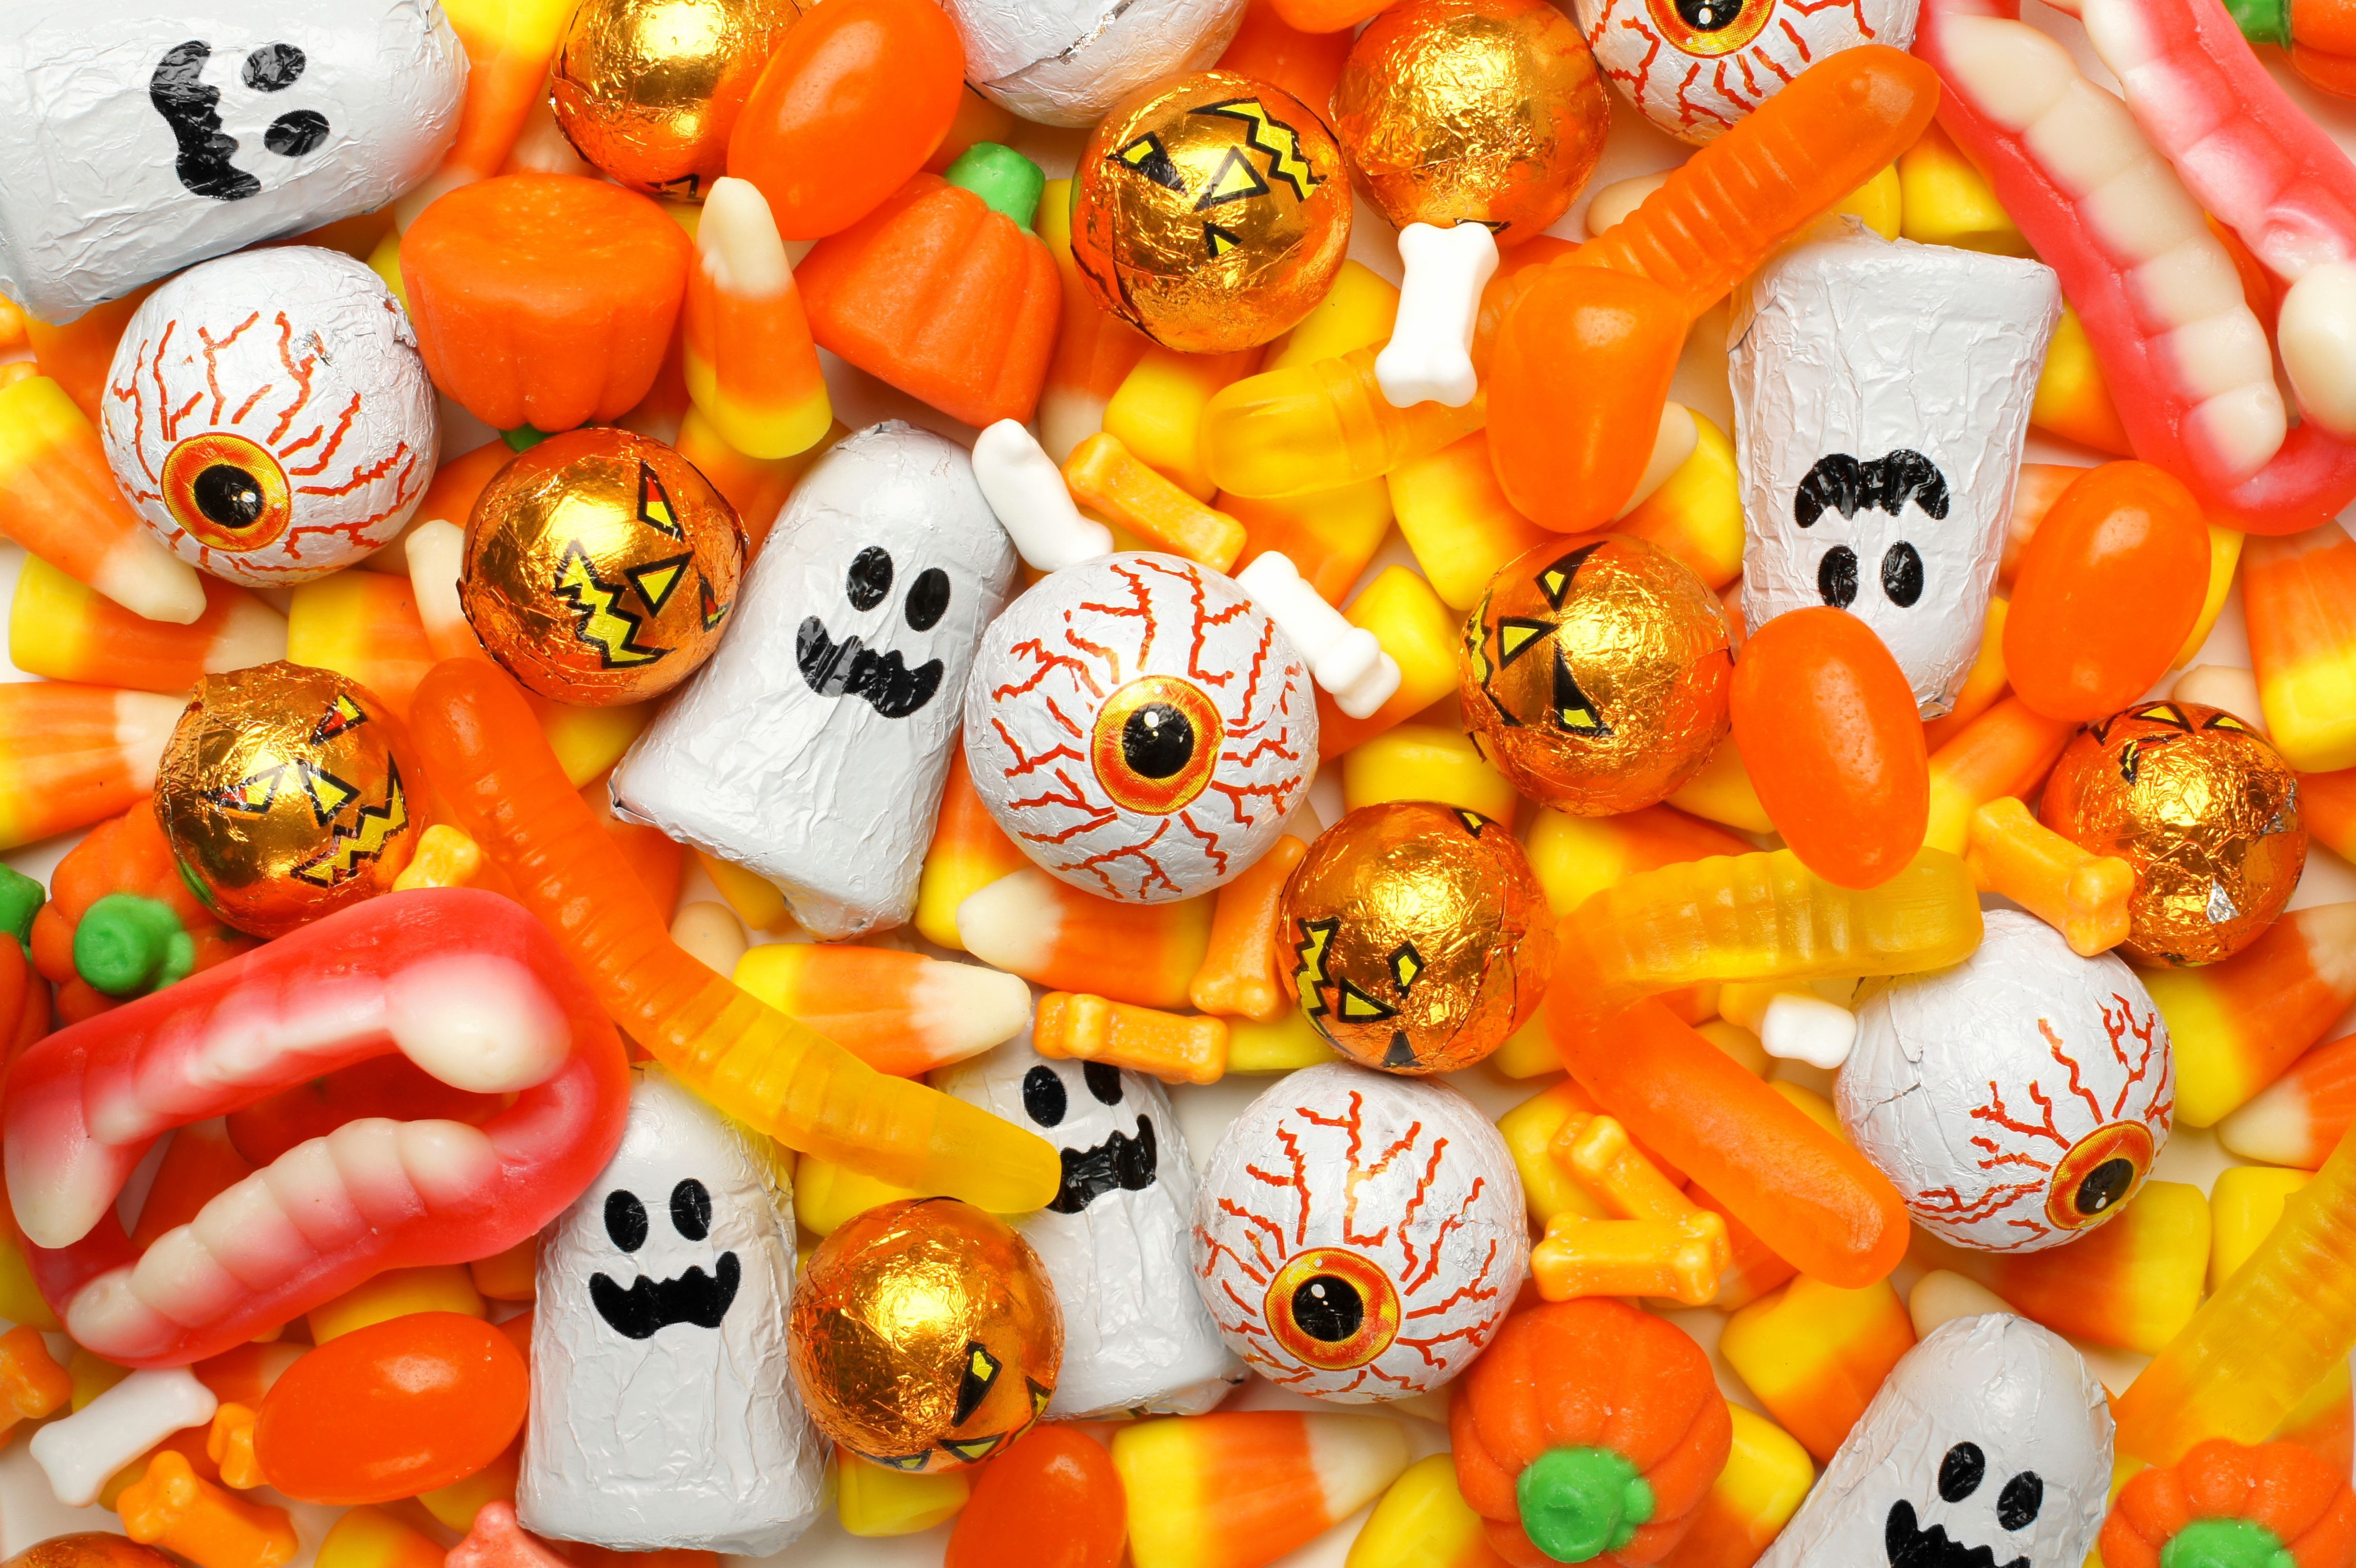 Healthy Candy and Chocolate Options For Halloween